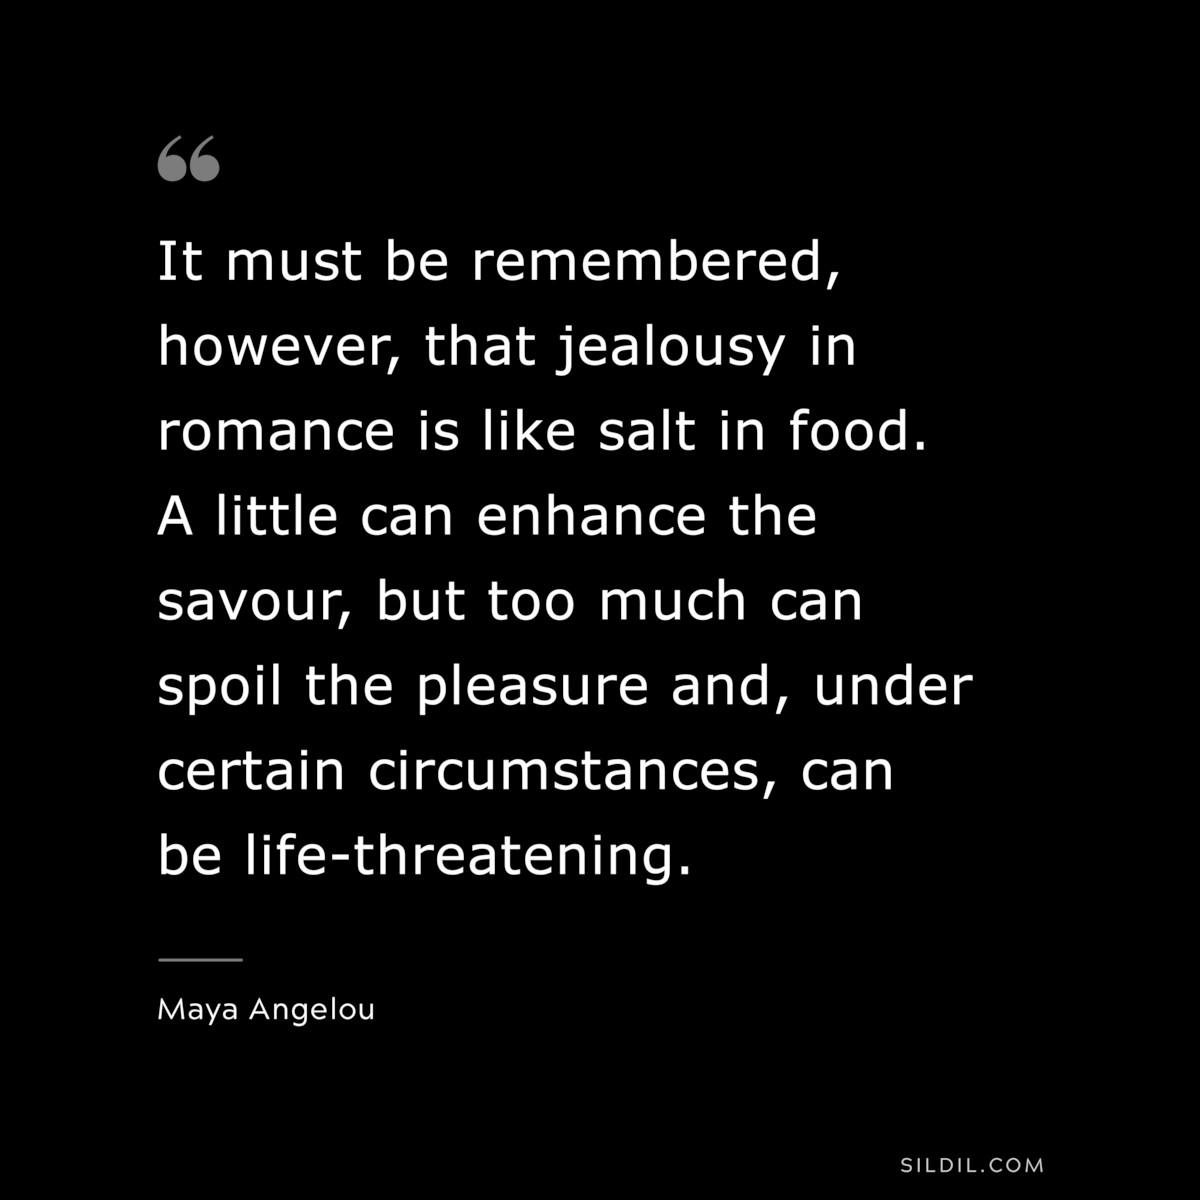 It must be remembered, however, that jealousy in romance is like salt in food. A little can enhance the savour, but too much can spoil the pleasure and, under certain circumstances, can be life-threatening. ― Maya Angelou